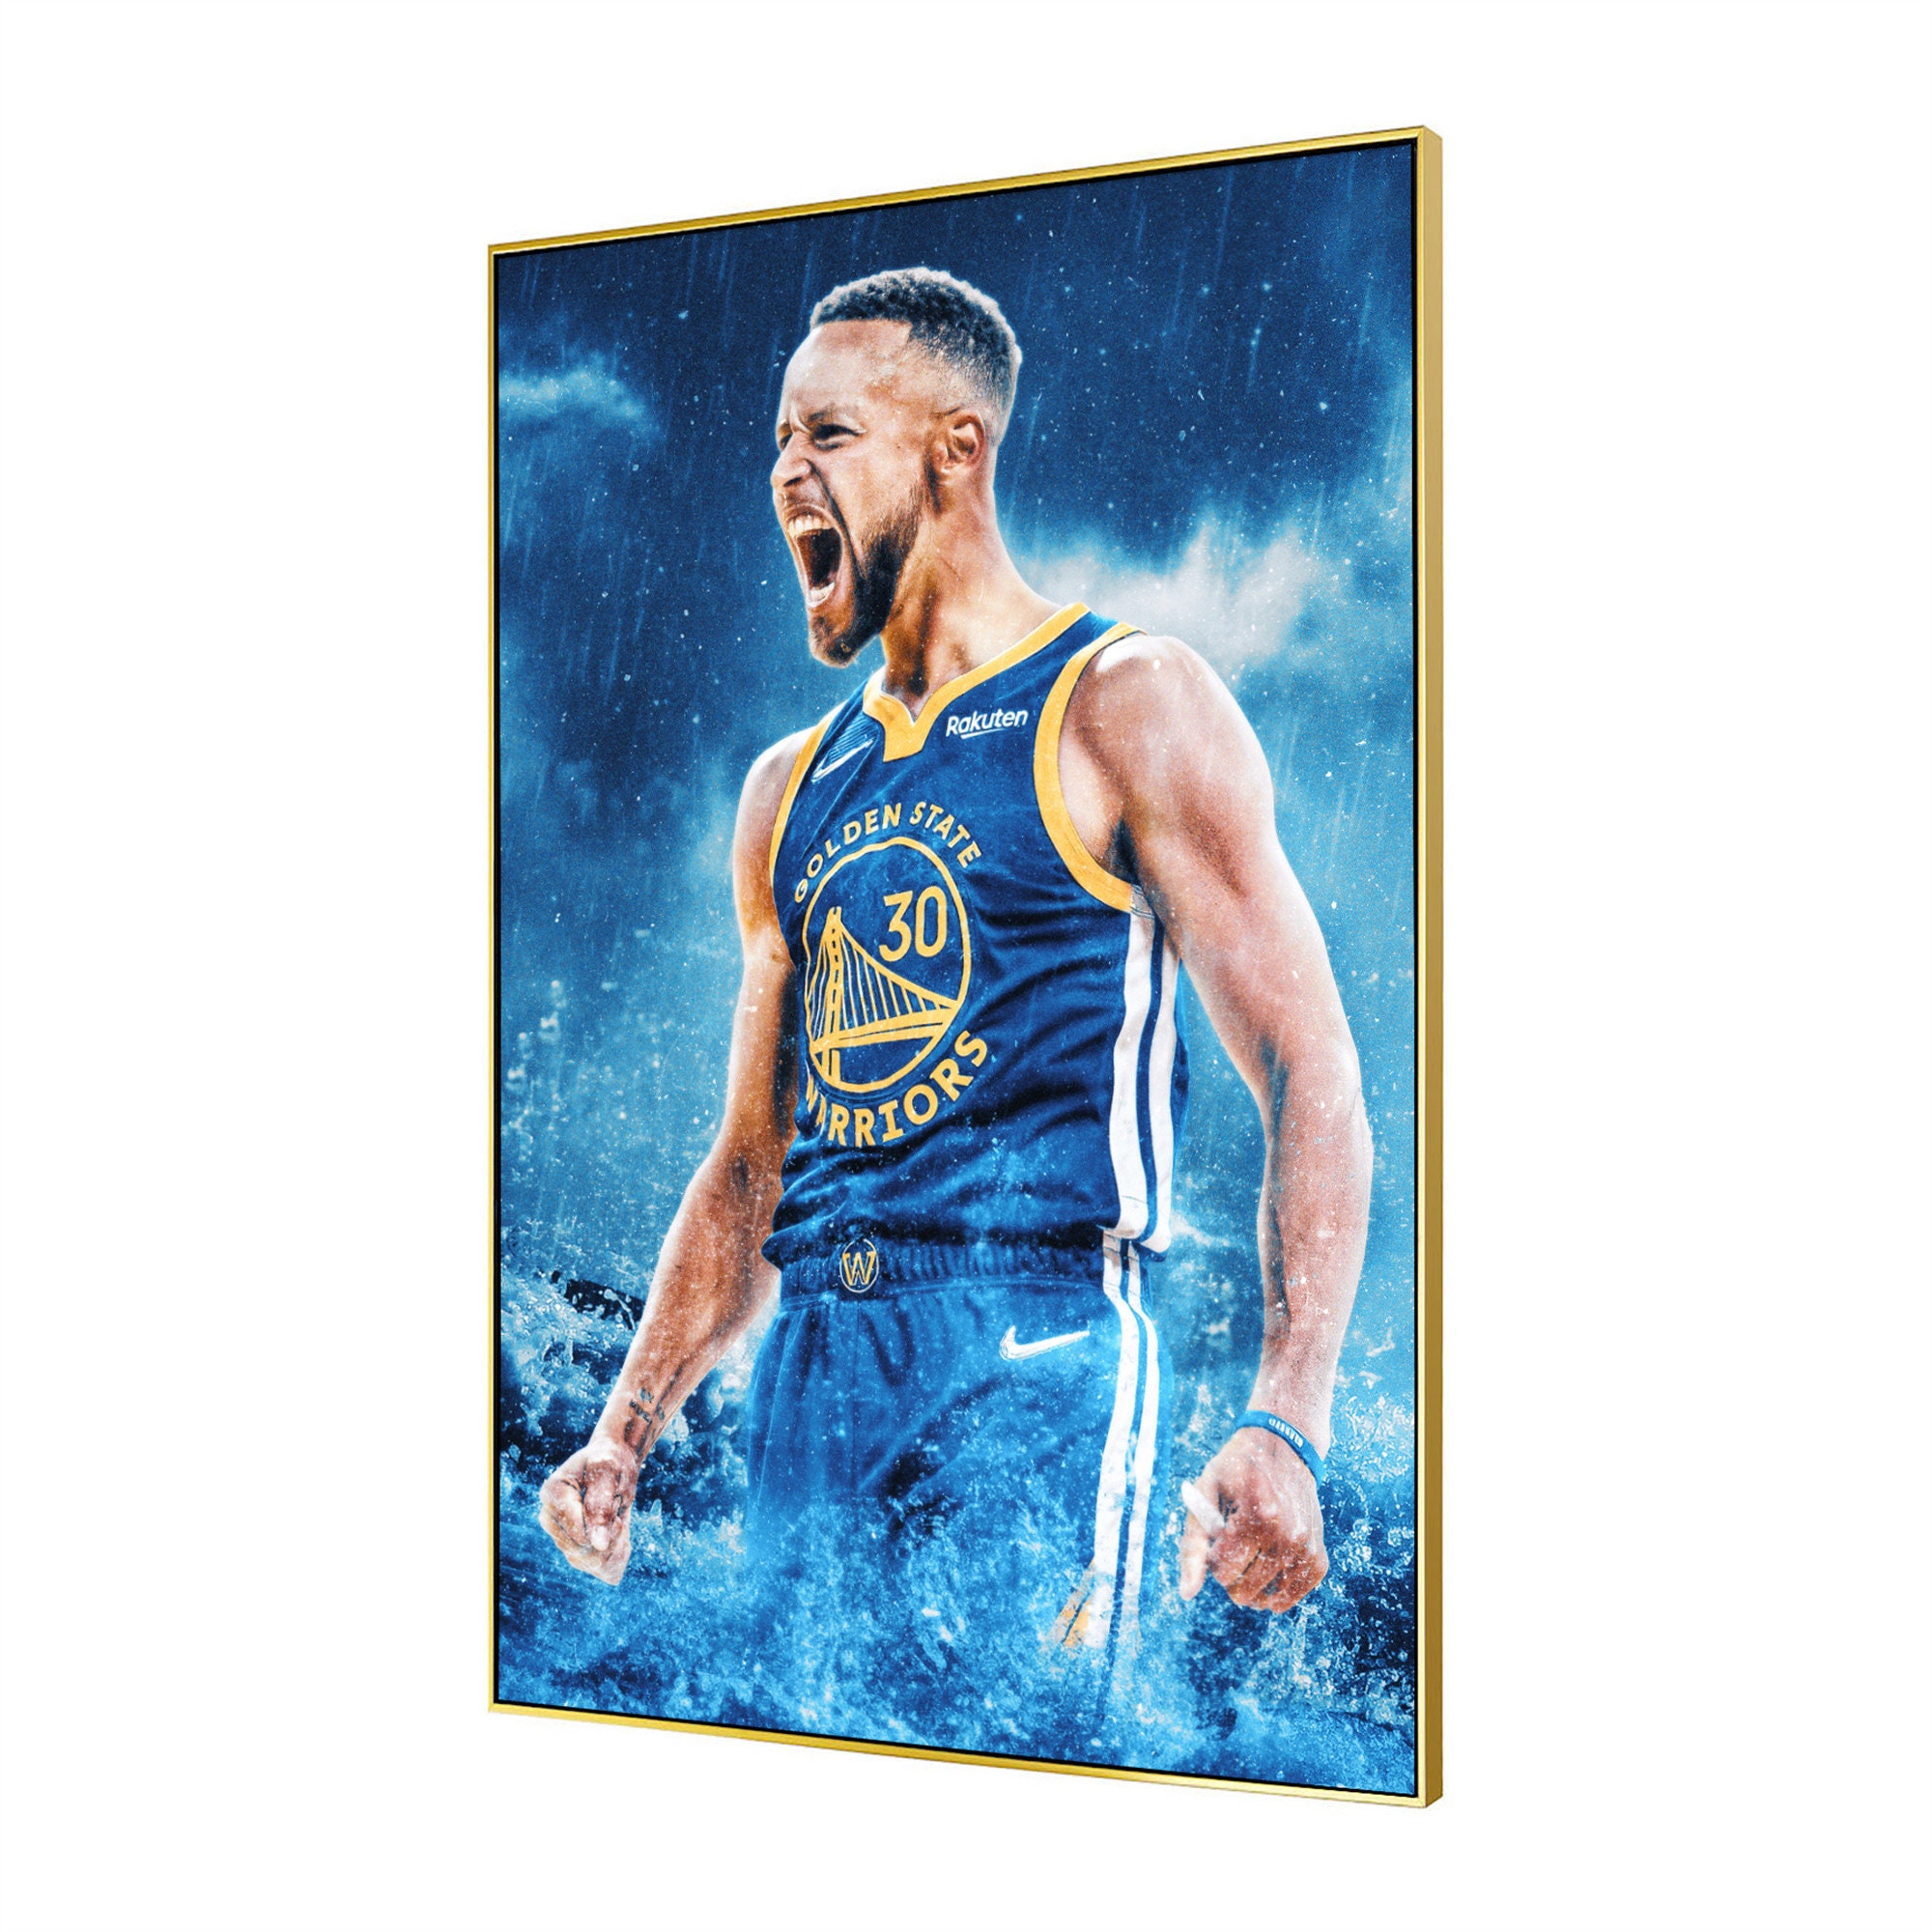 Steph Curry Word Art Poster | Golden State Warriors Gifts & Decor - 16x20 Standard Size Print